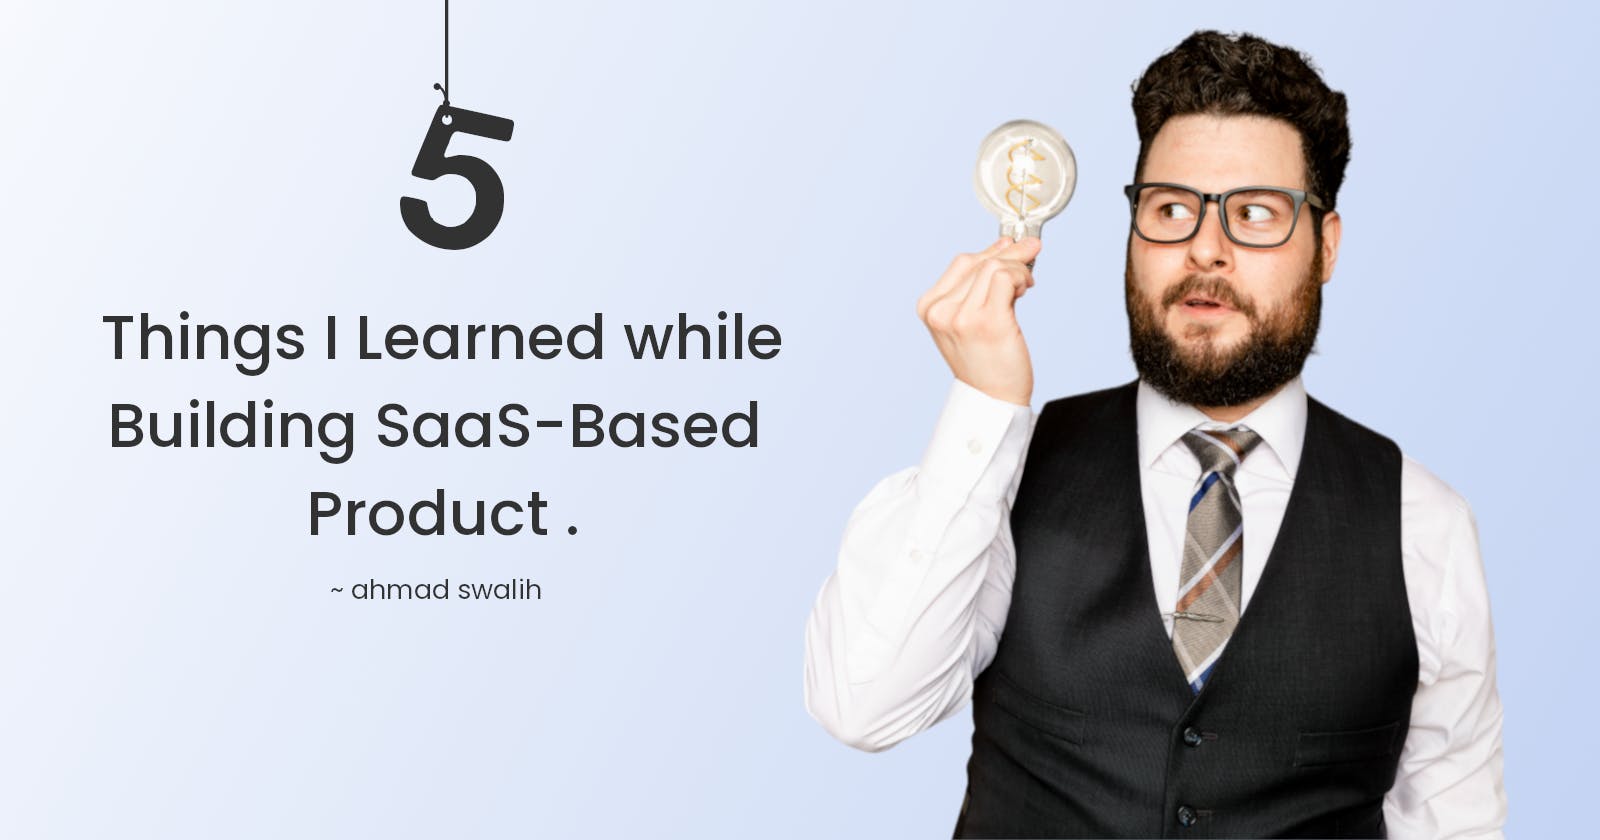 5 Things I Learned while Building SaaS-Based Product